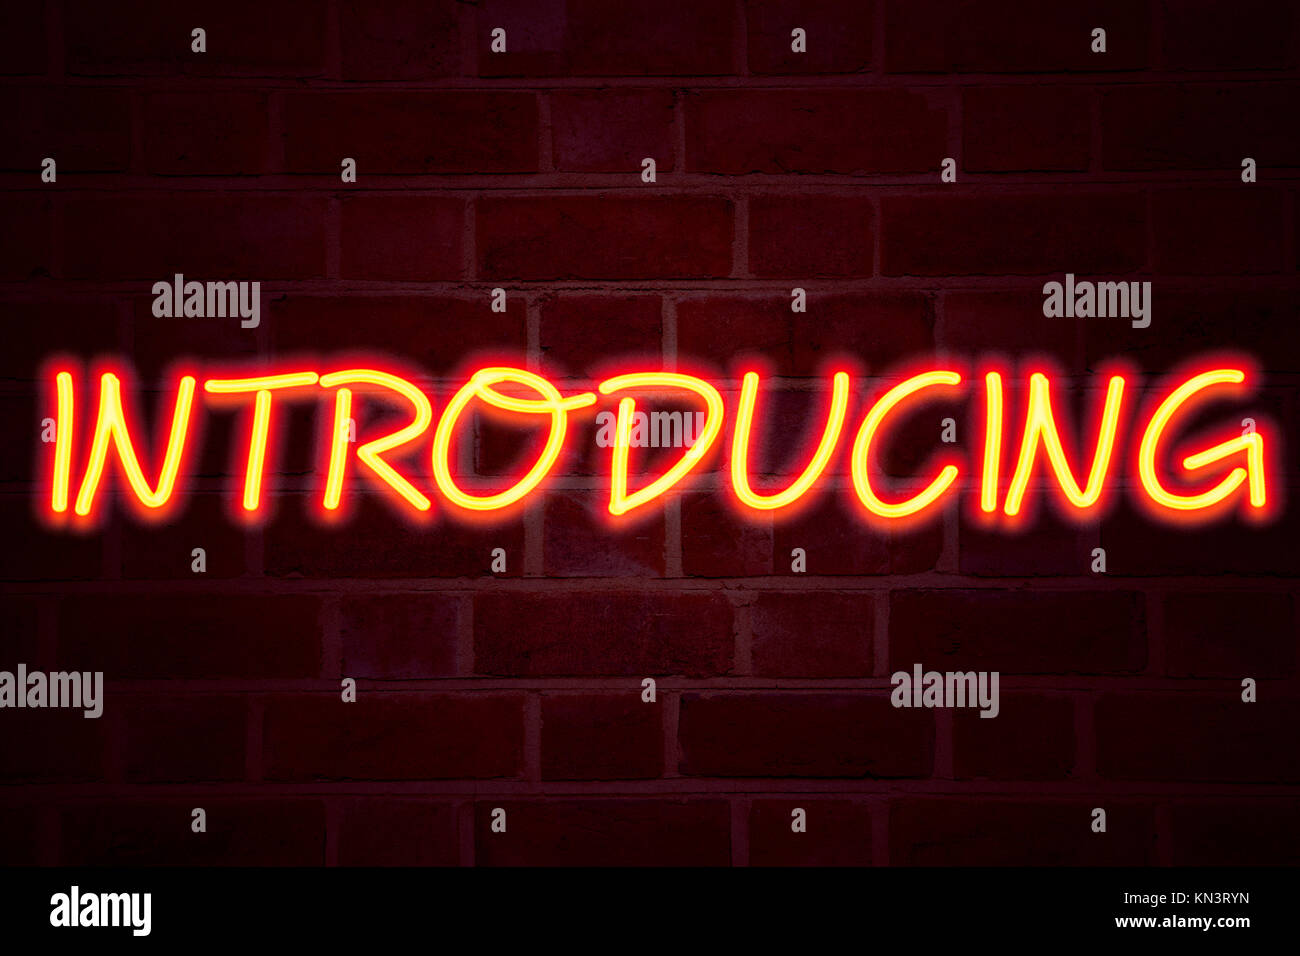 Introducing Neon Sign On Brick Wall Background Fluorescent Neon Tube Sign On Brickwork Business 